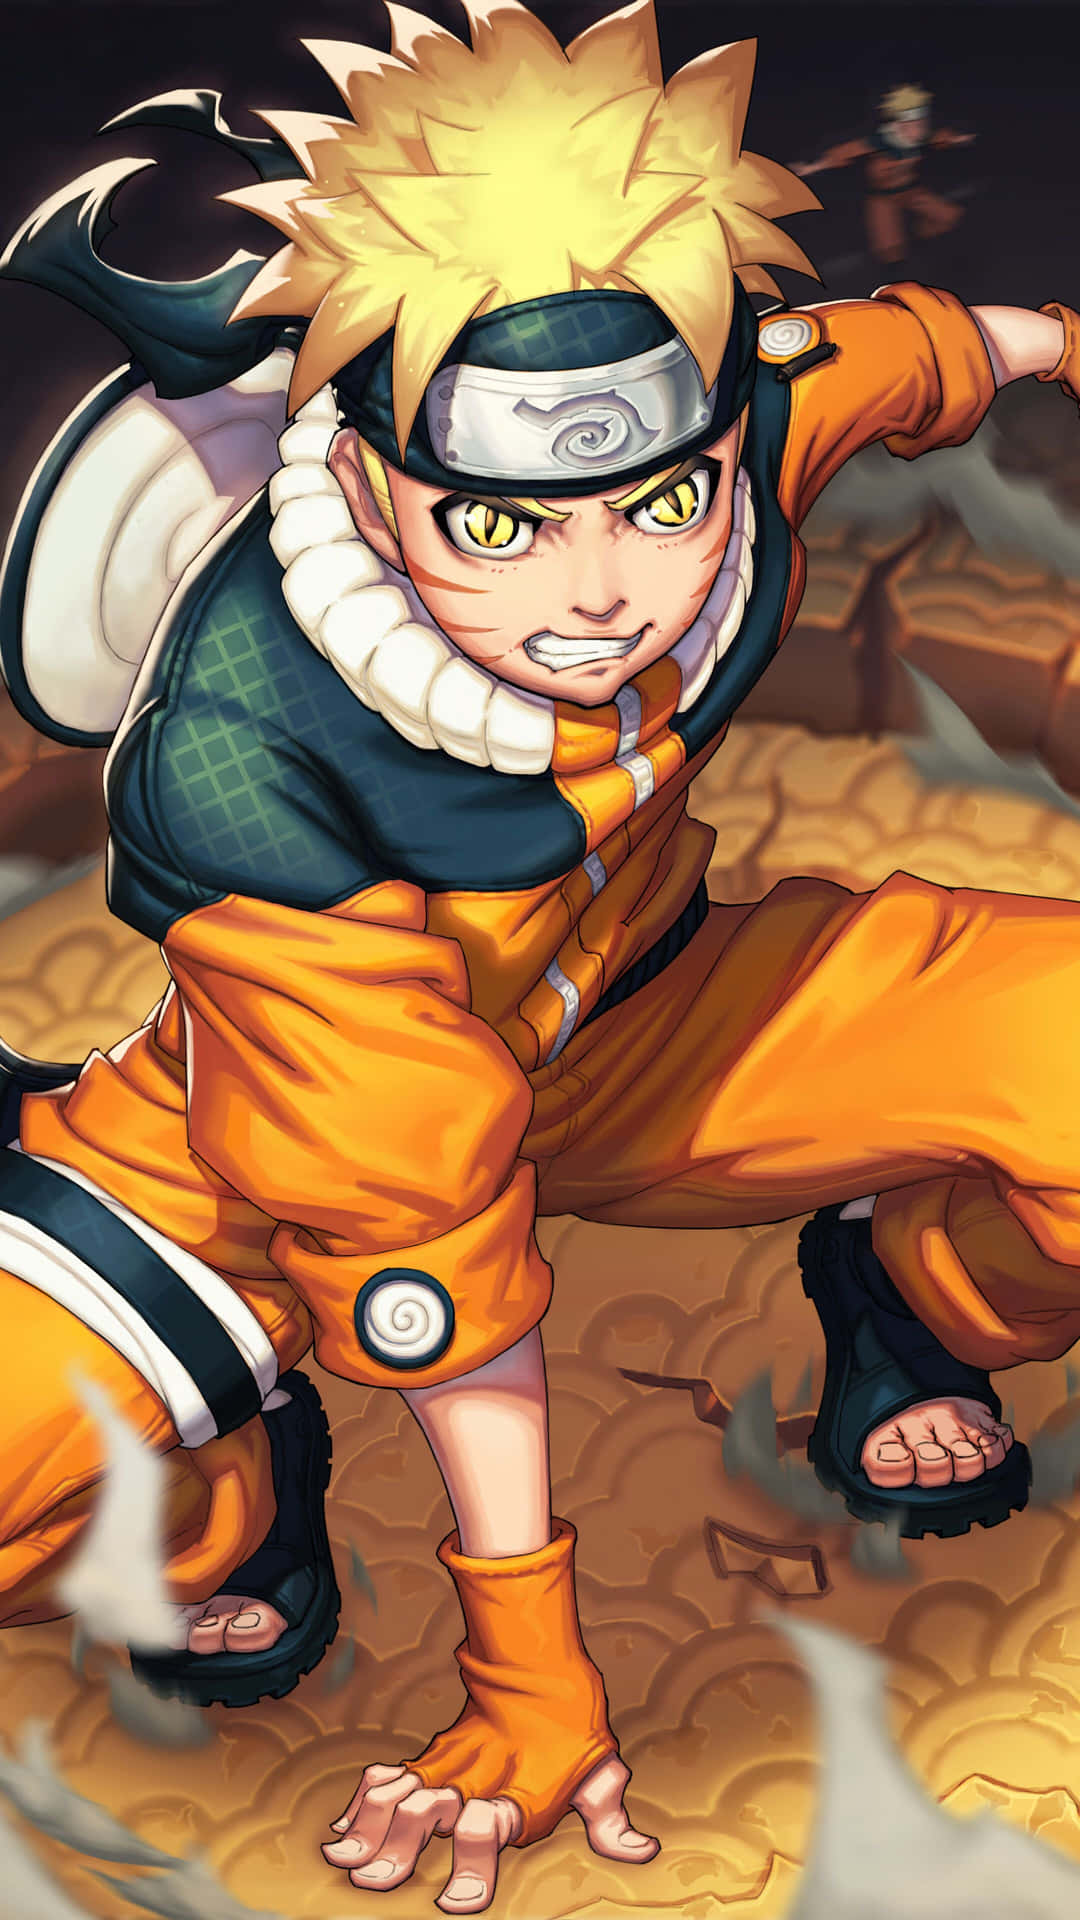 Bold and fierce - Naruto unleashes the power of the Nine-Tails Beast within him